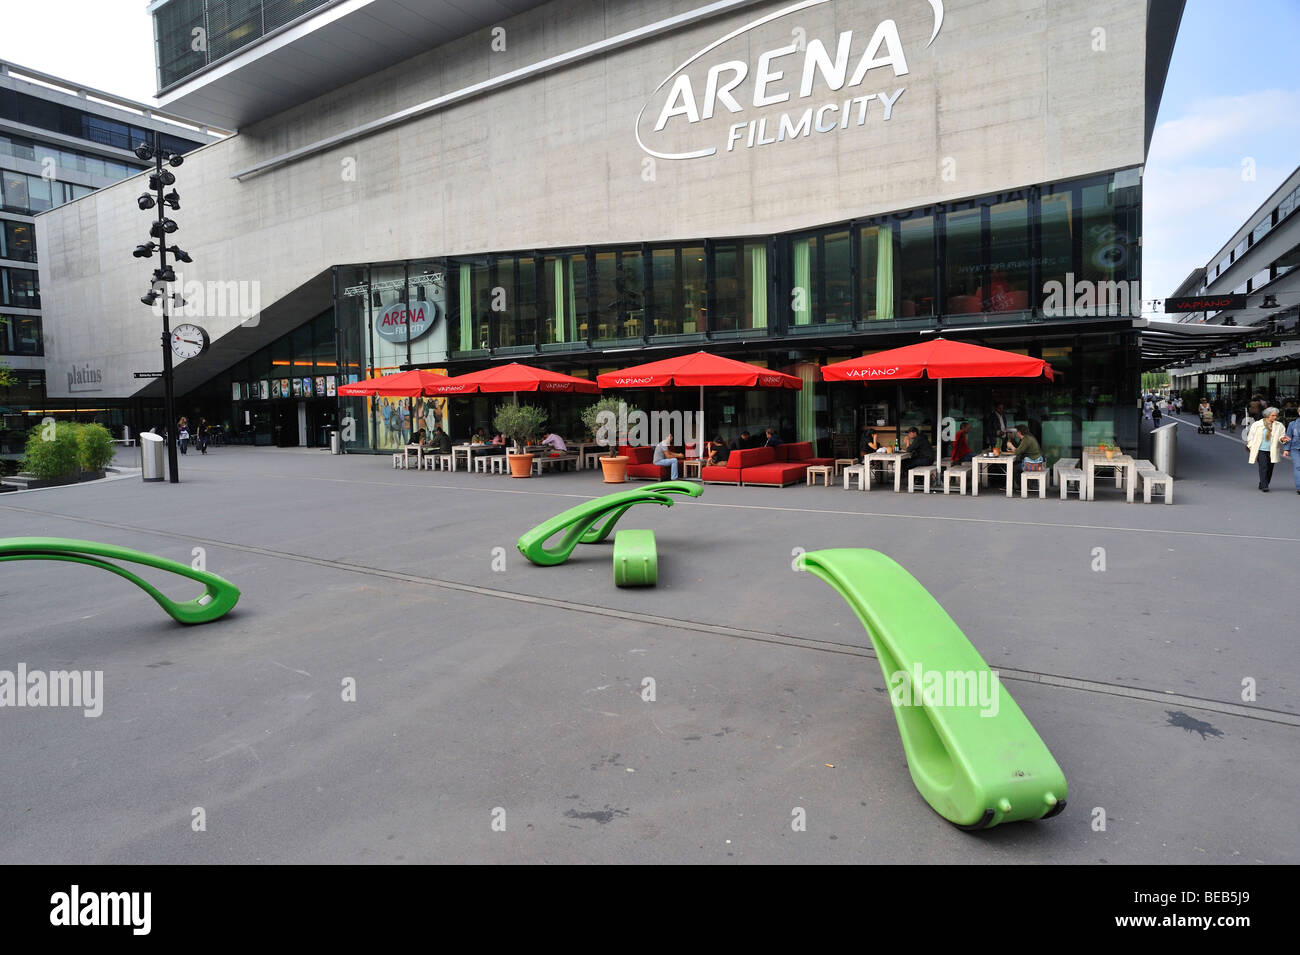 The Arena overlooking Kalander Platz in the Sihl City mall, Zurich Stock Photo